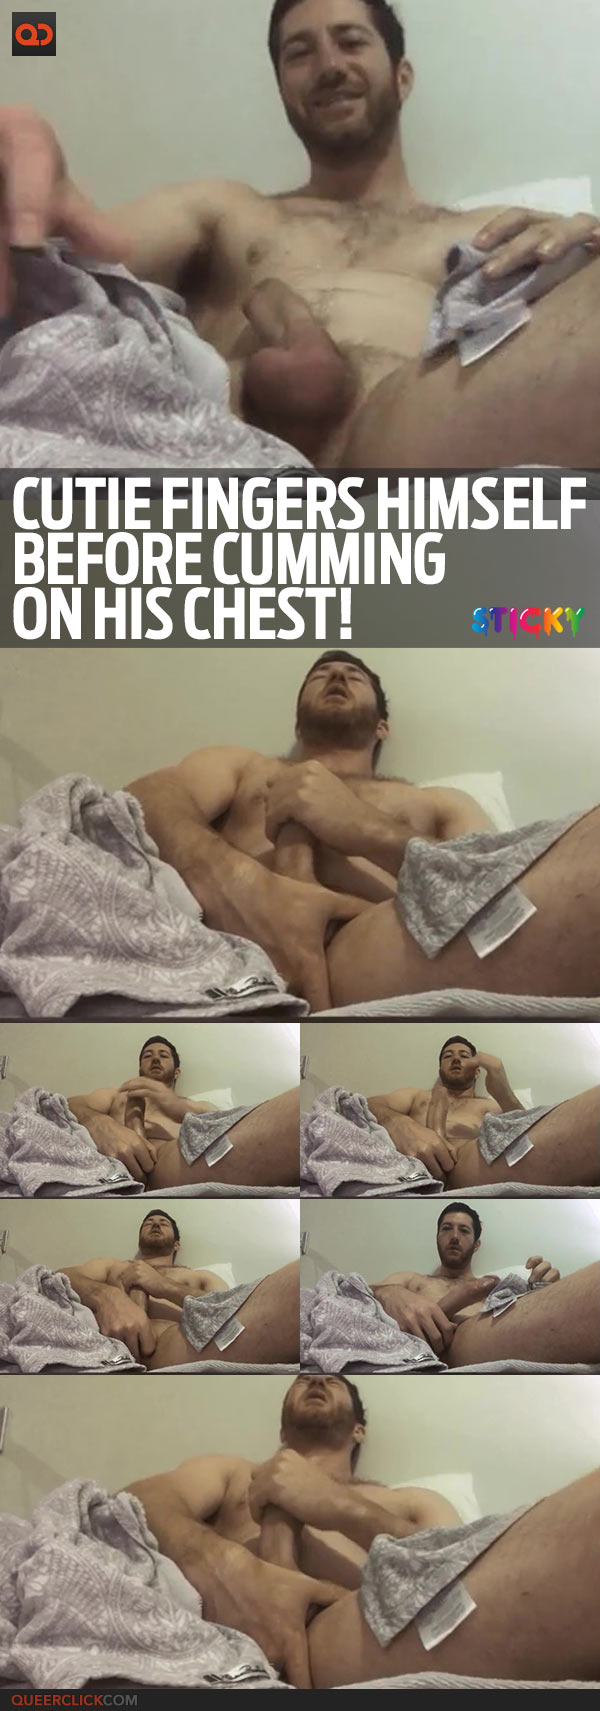 Cutie Fingers Himself Before Cumming On His Chest!